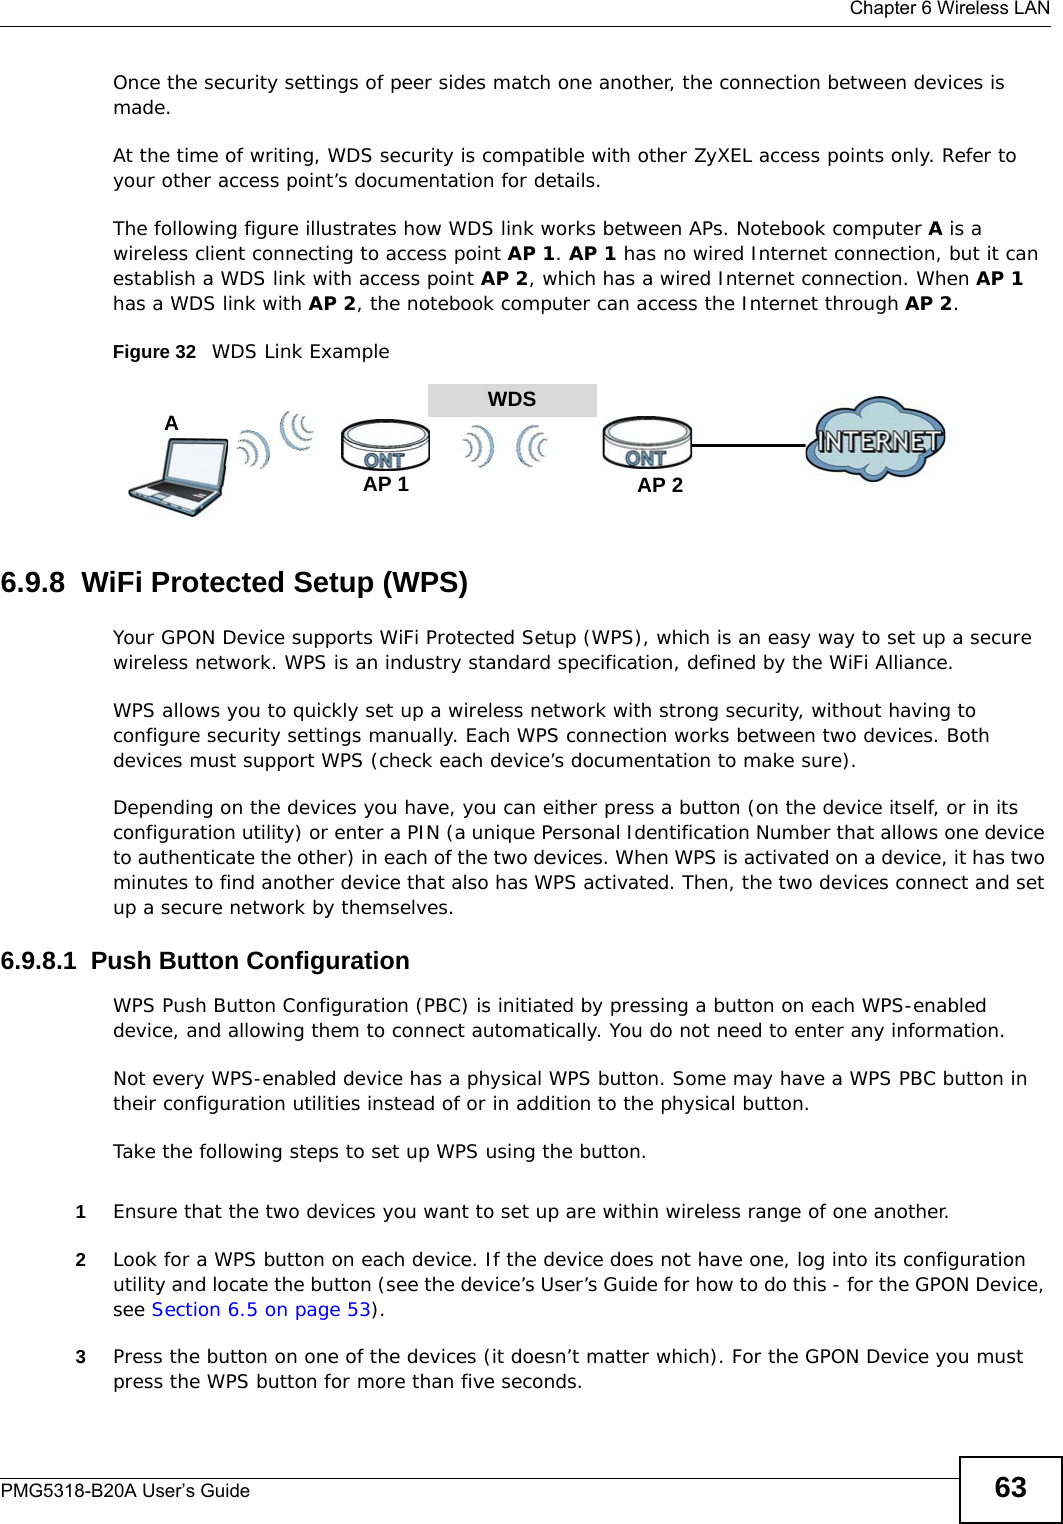  Chapter 6 Wireless LANPMG5318-B20A User’s Guide 63Once the security settings of peer sides match one another, the connection between devices is made.At the time of writing, WDS security is compatible with other ZyXEL access points only. Refer to your other access point’s documentation for details.The following figure illustrates how WDS link works between APs. Notebook computer A is a wireless client connecting to access point AP 1. AP 1 has no wired Internet connection, but it can establish a WDS link with access point AP 2, which has a wired Internet connection. When AP 1 has a WDS link with AP 2, the notebook computer can access the Internet through AP 2.Figure 32   WDS Link Example6.9.8  WiFi Protected Setup (WPS)Your GPON Device supports WiFi Protected Setup (WPS), which is an easy way to set up a secure wireless network. WPS is an industry standard specification, defined by the WiFi Alliance.WPS allows you to quickly set up a wireless network with strong security, without having to configure security settings manually. Each WPS connection works between two devices. Both devices must support WPS (check each device’s documentation to make sure). Depending on the devices you have, you can either press a button (on the device itself, or in its configuration utility) or enter a PIN (a unique Personal Identification Number that allows one device to authenticate the other) in each of the two devices. When WPS is activated on a device, it has two minutes to find another device that also has WPS activated. Then, the two devices connect and set up a secure network by themselves.6.9.8.1  Push Button ConfigurationWPS Push Button Configuration (PBC) is initiated by pressing a button on each WPS-enabled device, and allowing them to connect automatically. You do not need to enter any information. Not every WPS-enabled device has a physical WPS button. Some may have a WPS PBC button in their configuration utilities instead of or in addition to the physical button.Take the following steps to set up WPS using the button.1Ensure that the two devices you want to set up are within wireless range of one another. 2Look for a WPS button on each device. If the device does not have one, log into its configuration utility and locate the button (see the device’s User’s Guide for how to do this - for the GPON Device, see Section 6.5 on page 53).3Press the button on one of the devices (it doesn’t matter which). For the GPON Device you must press the WPS button for more than five seconds.WDSAP 2AP 1A